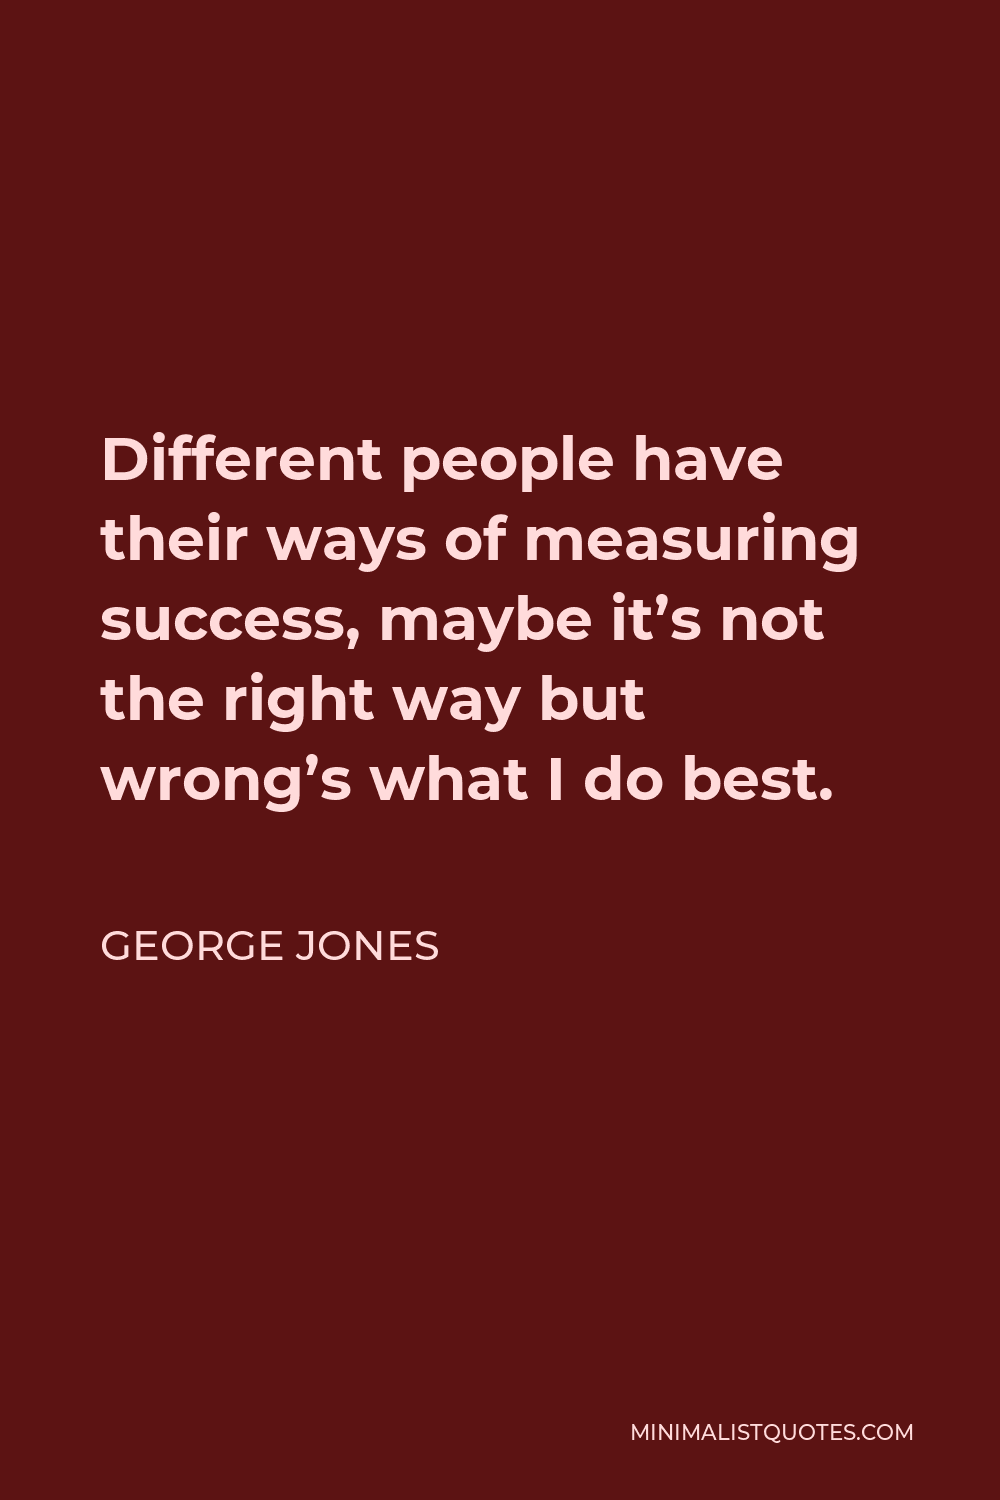 George Jones Quote - Different people have their ways of measuring success, maybe it’s not the right way but wrong’s what I do best.